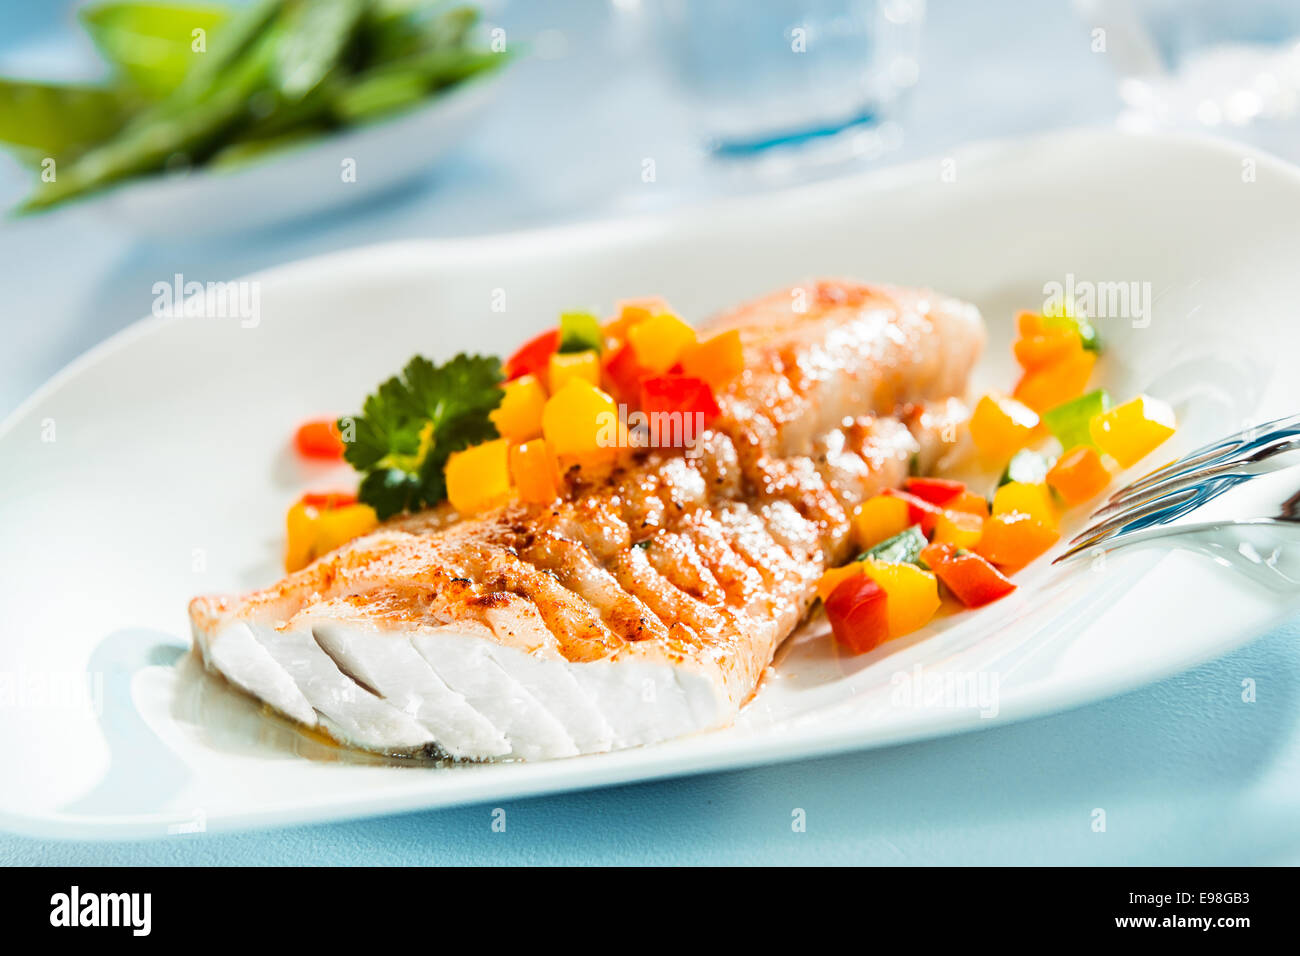 Delicious healthy grilled fish fillet served on a platter with a colorful fresh salad for a tasty seafood dinner Stock Photo